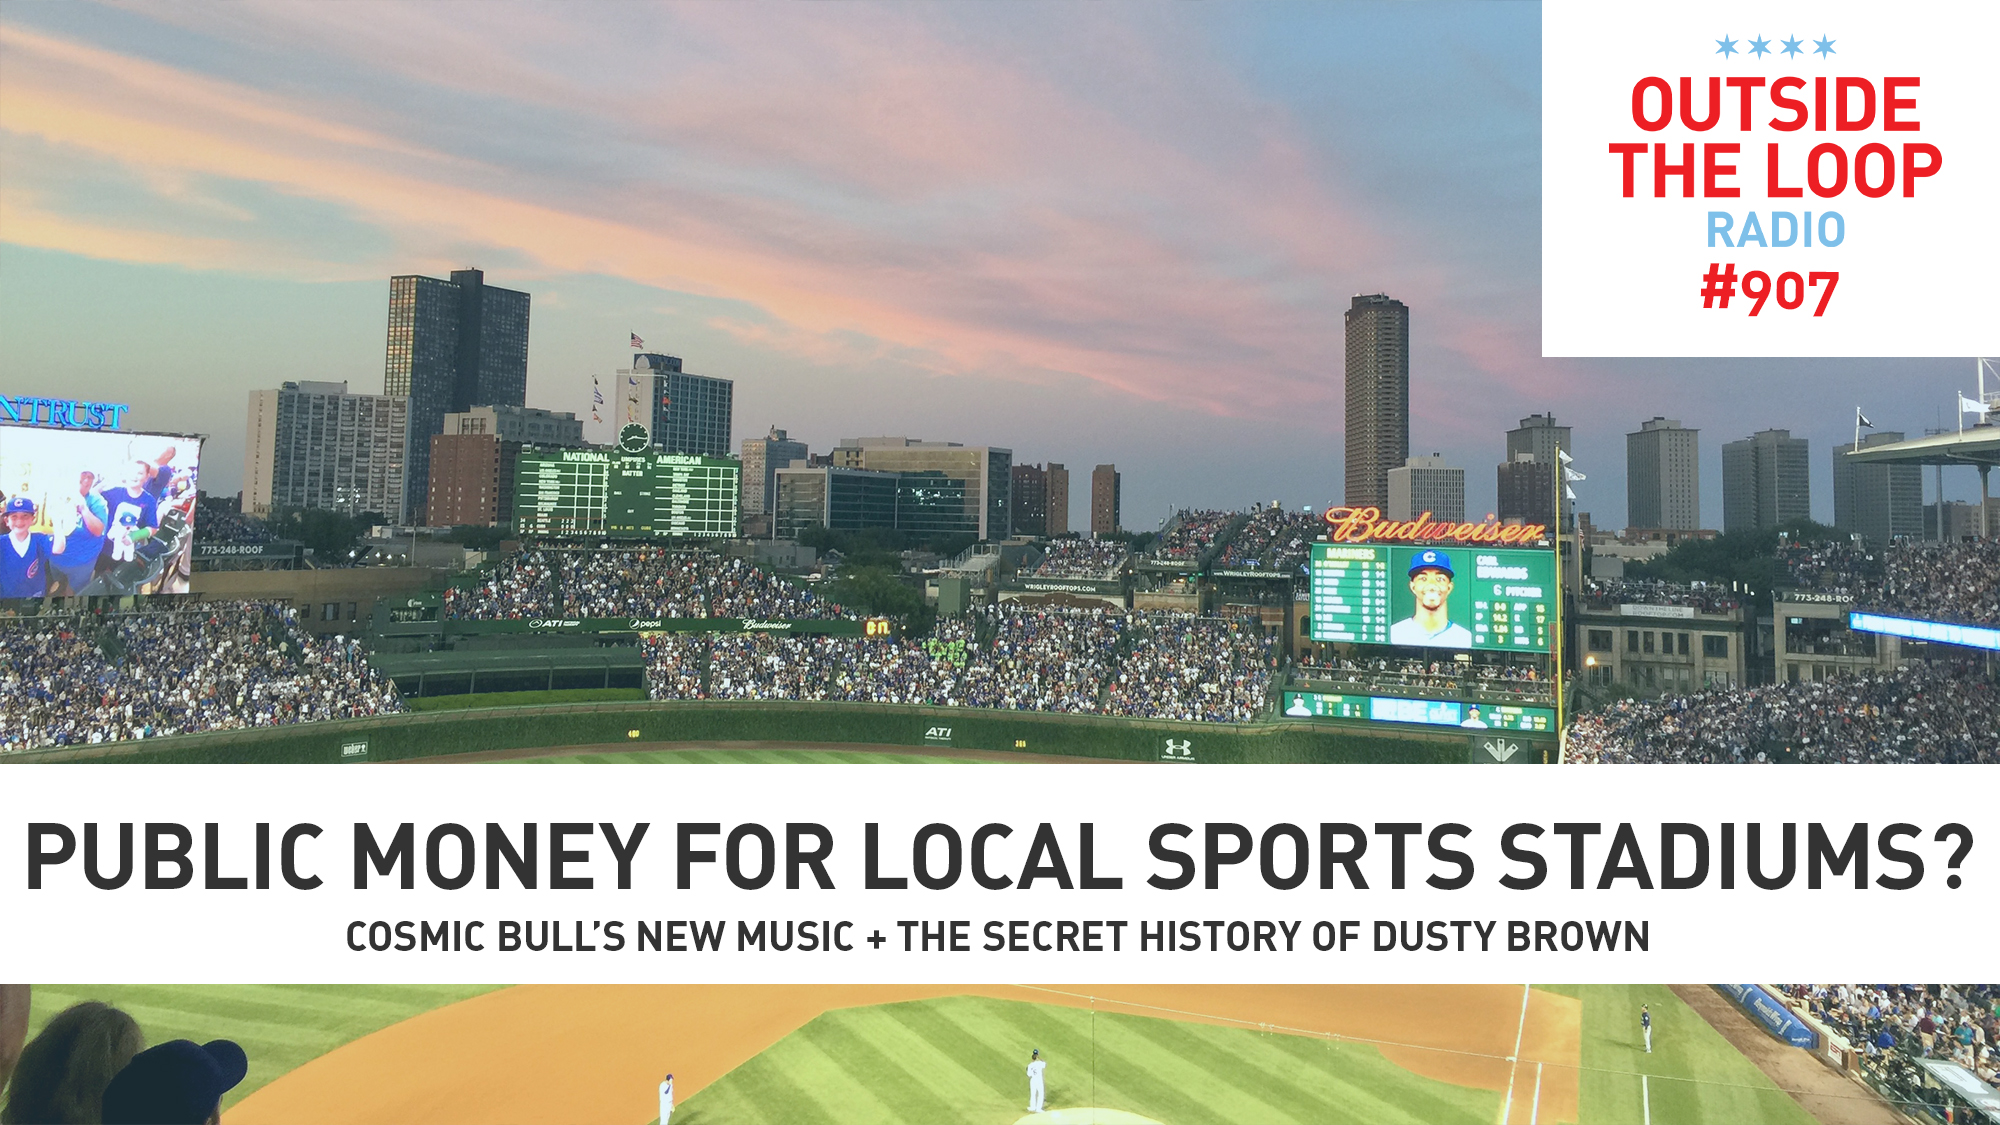 Why should we use public money to build local sports stadiums? (Photo credit: Mike Stephen/WGN Radio)